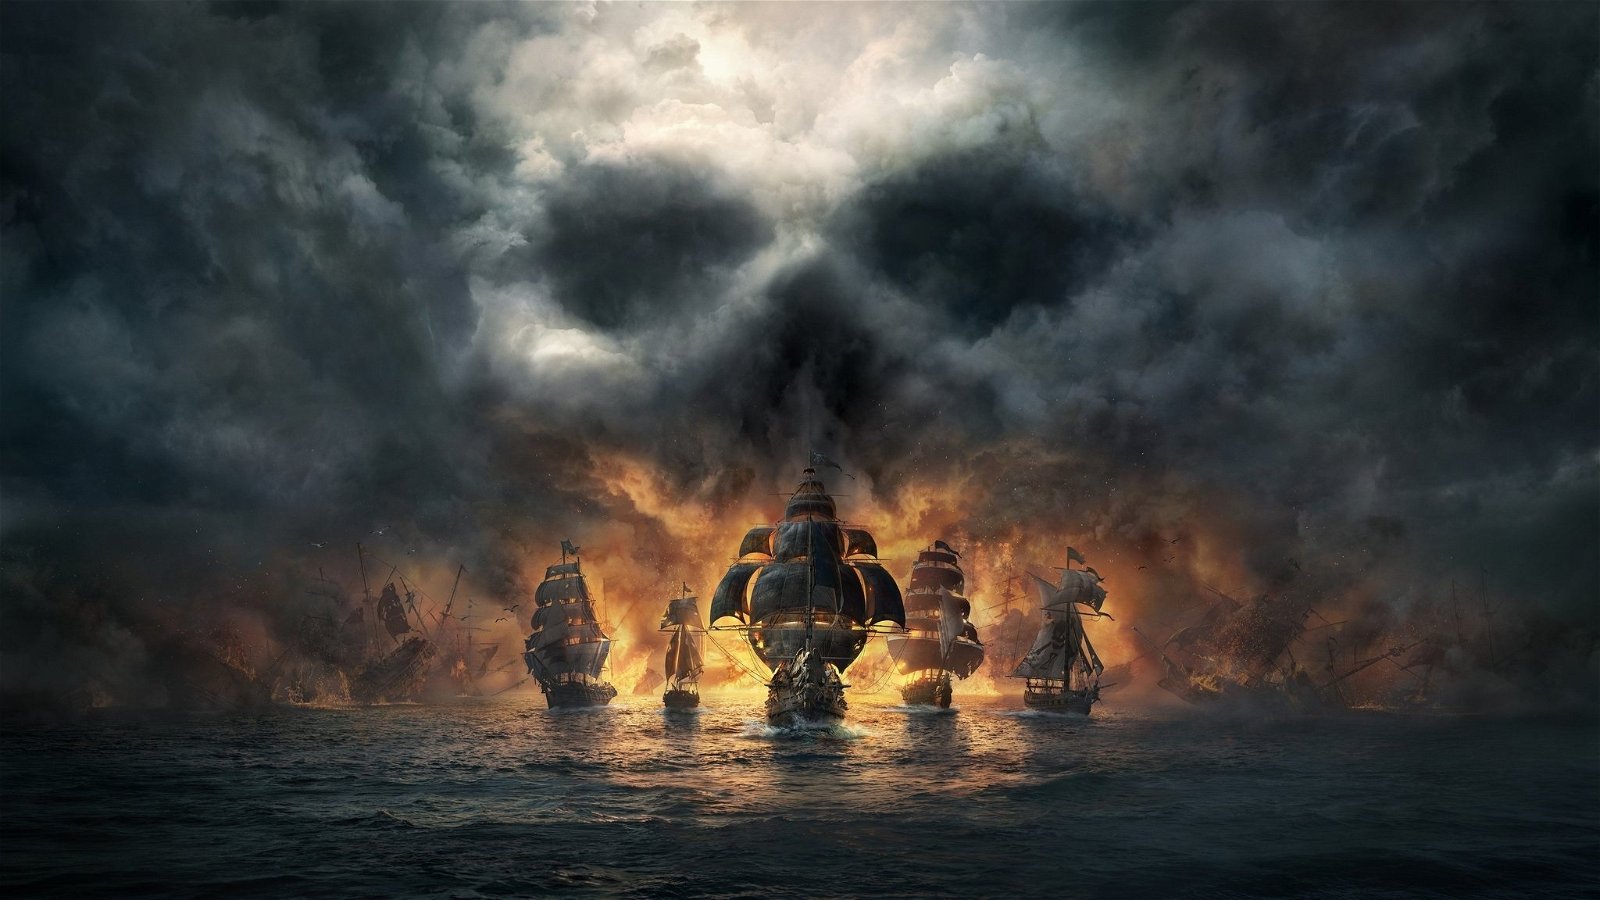 Skull & Bones reveals the importance that the plot will have in the game